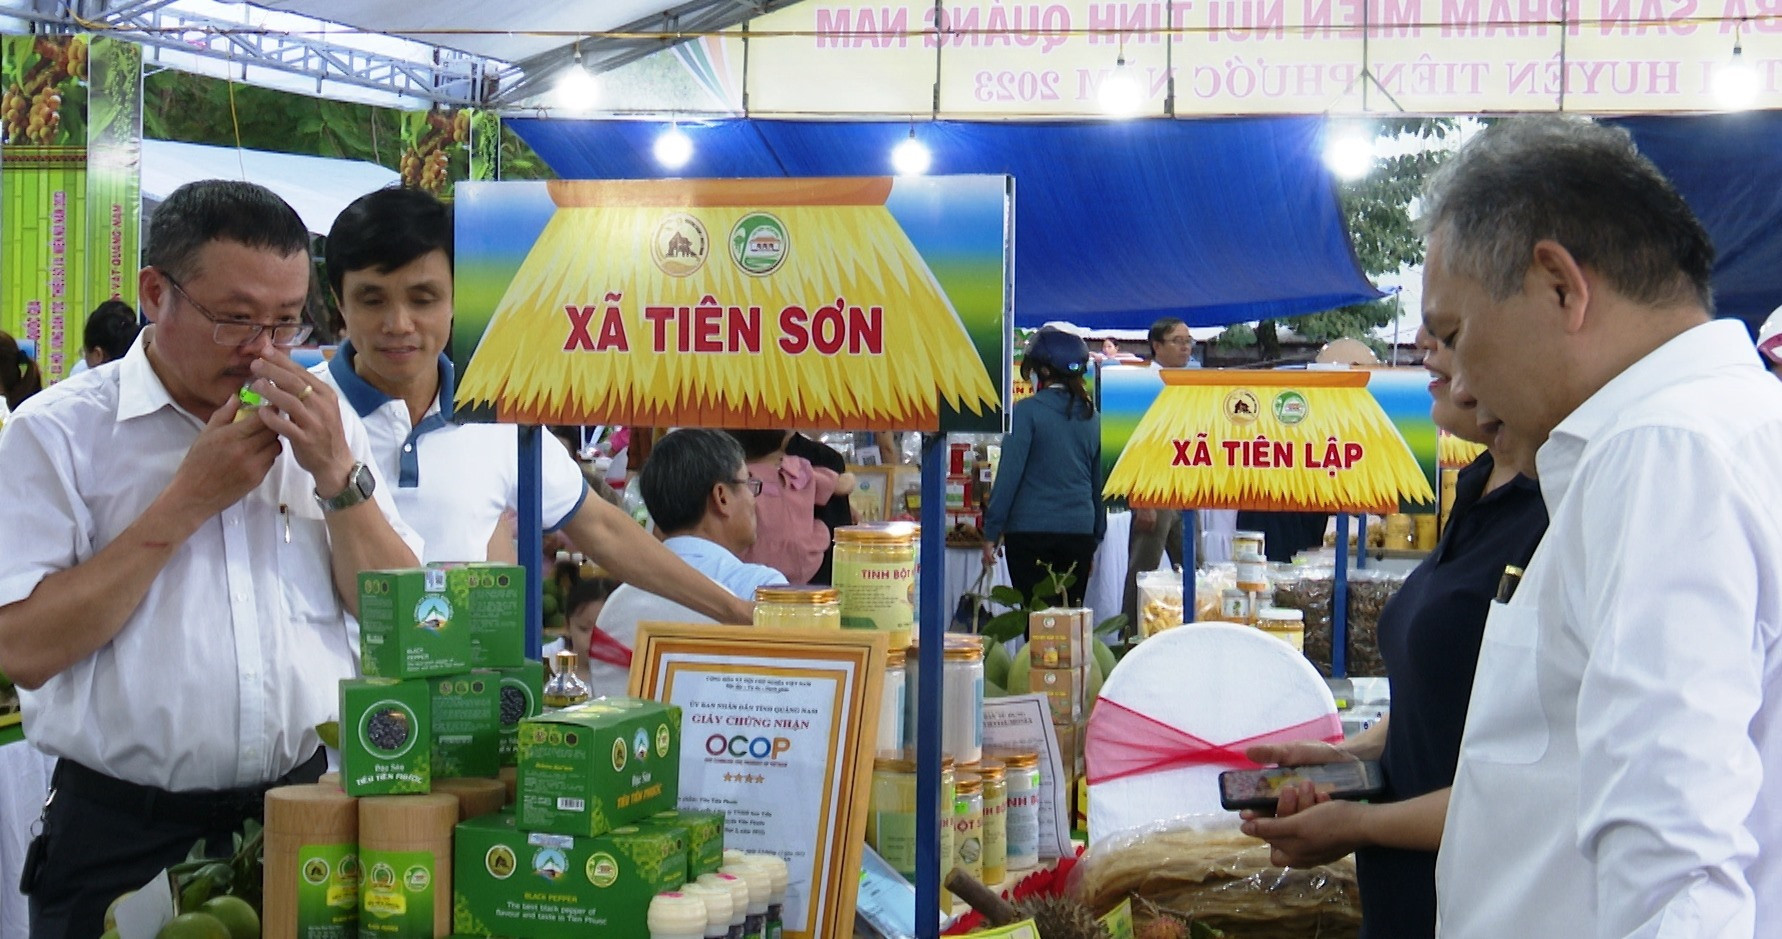 The festival attracts more than 80 booths from nearly 100 businesses, craft village establishments, cooperatives... in Quang Nam province.